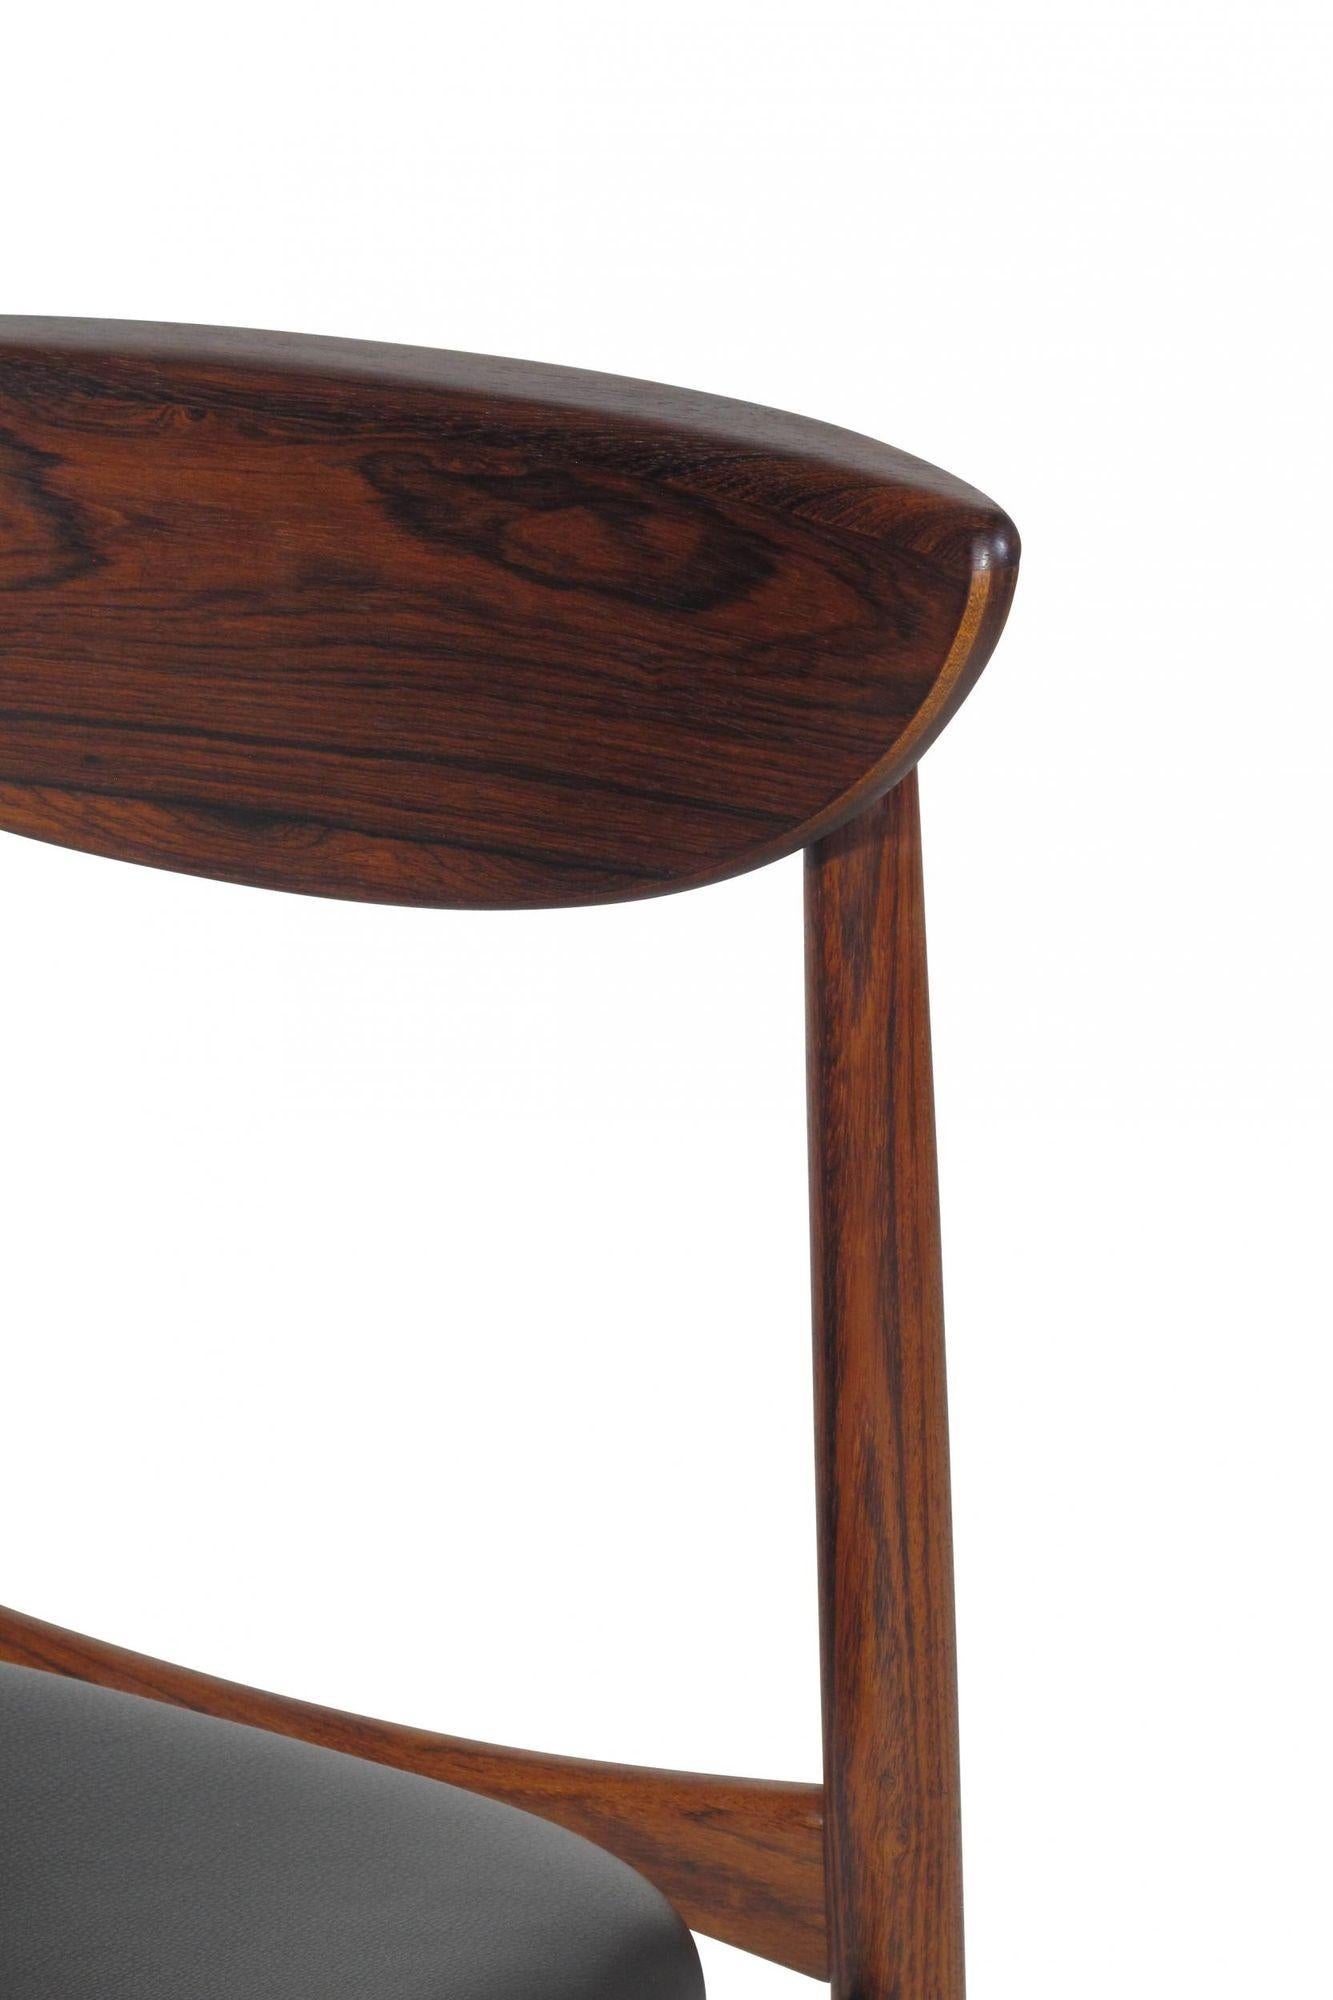 Oiled Six '6' Kurt Ostervig Mid-Century Rosewood Dining Chairs in Black Leather For Sale